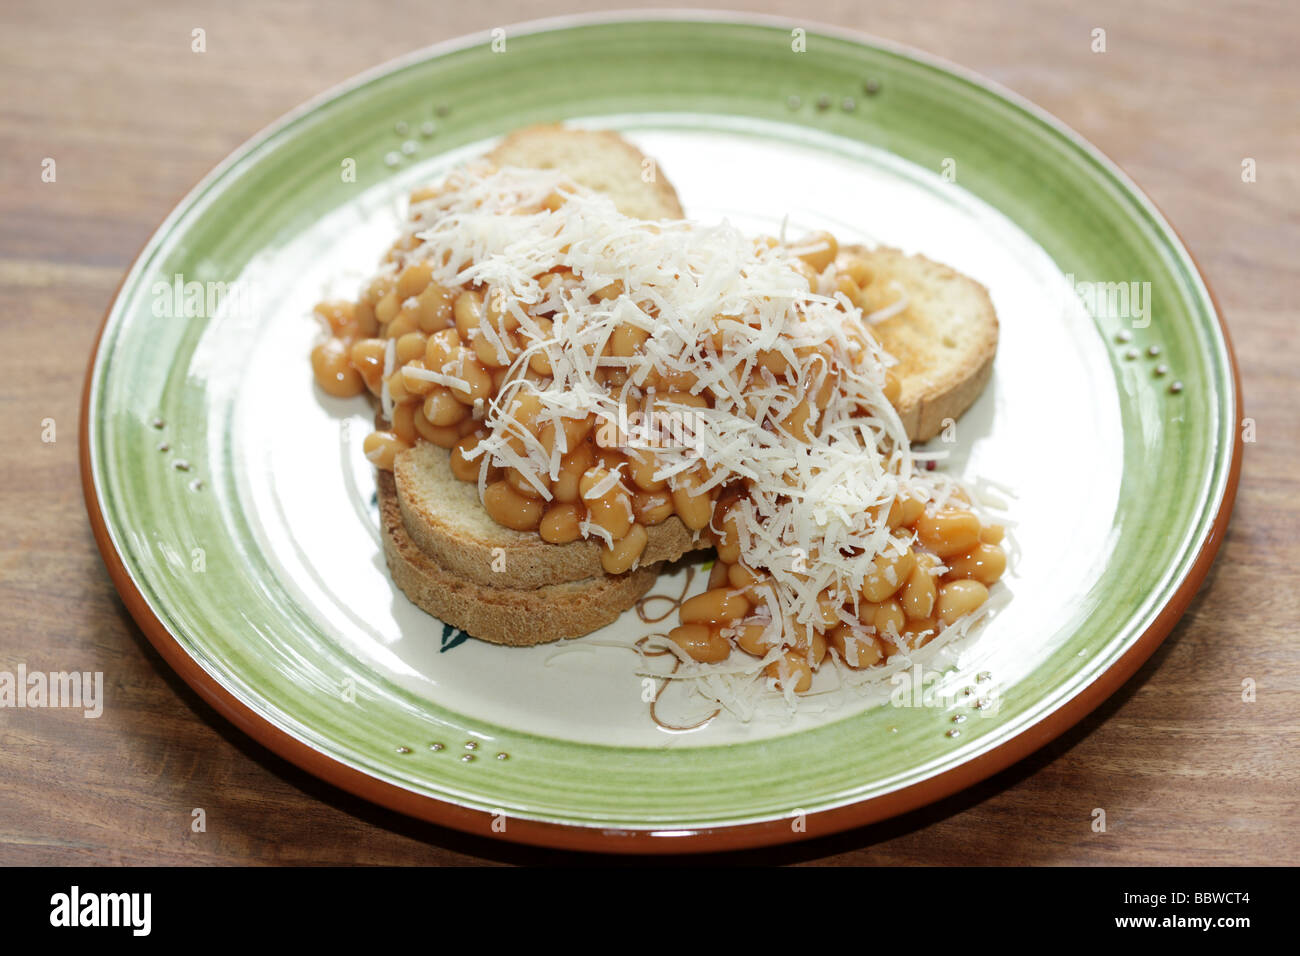 Baked Beans and Parmesan Cheese on Bruschetta Stock Photo